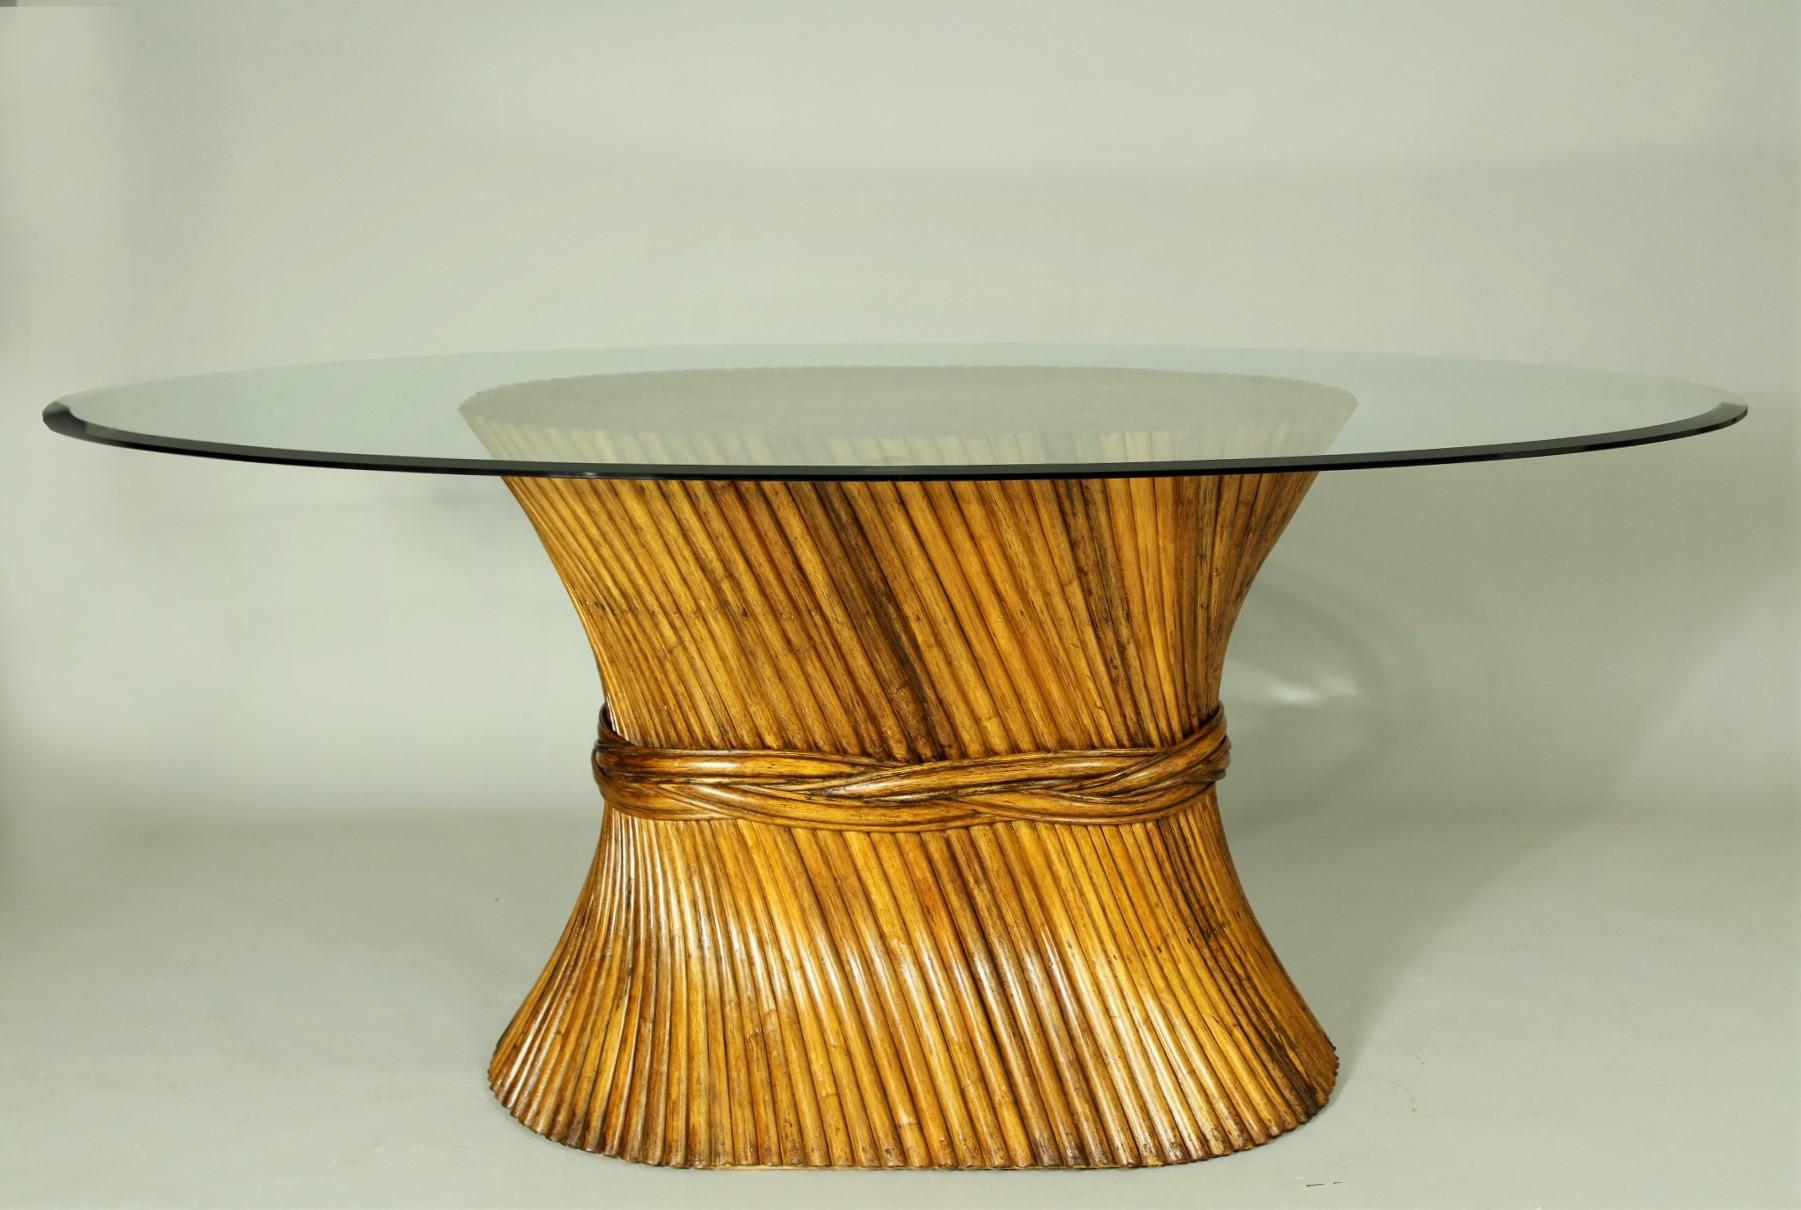 Sheaf of wheat table with glass top from the 1970s. The base is formed with bundled reeds with a woven band surrounding the center. The base supports a much larger glass top. Unmarked. This table is in very good condition.